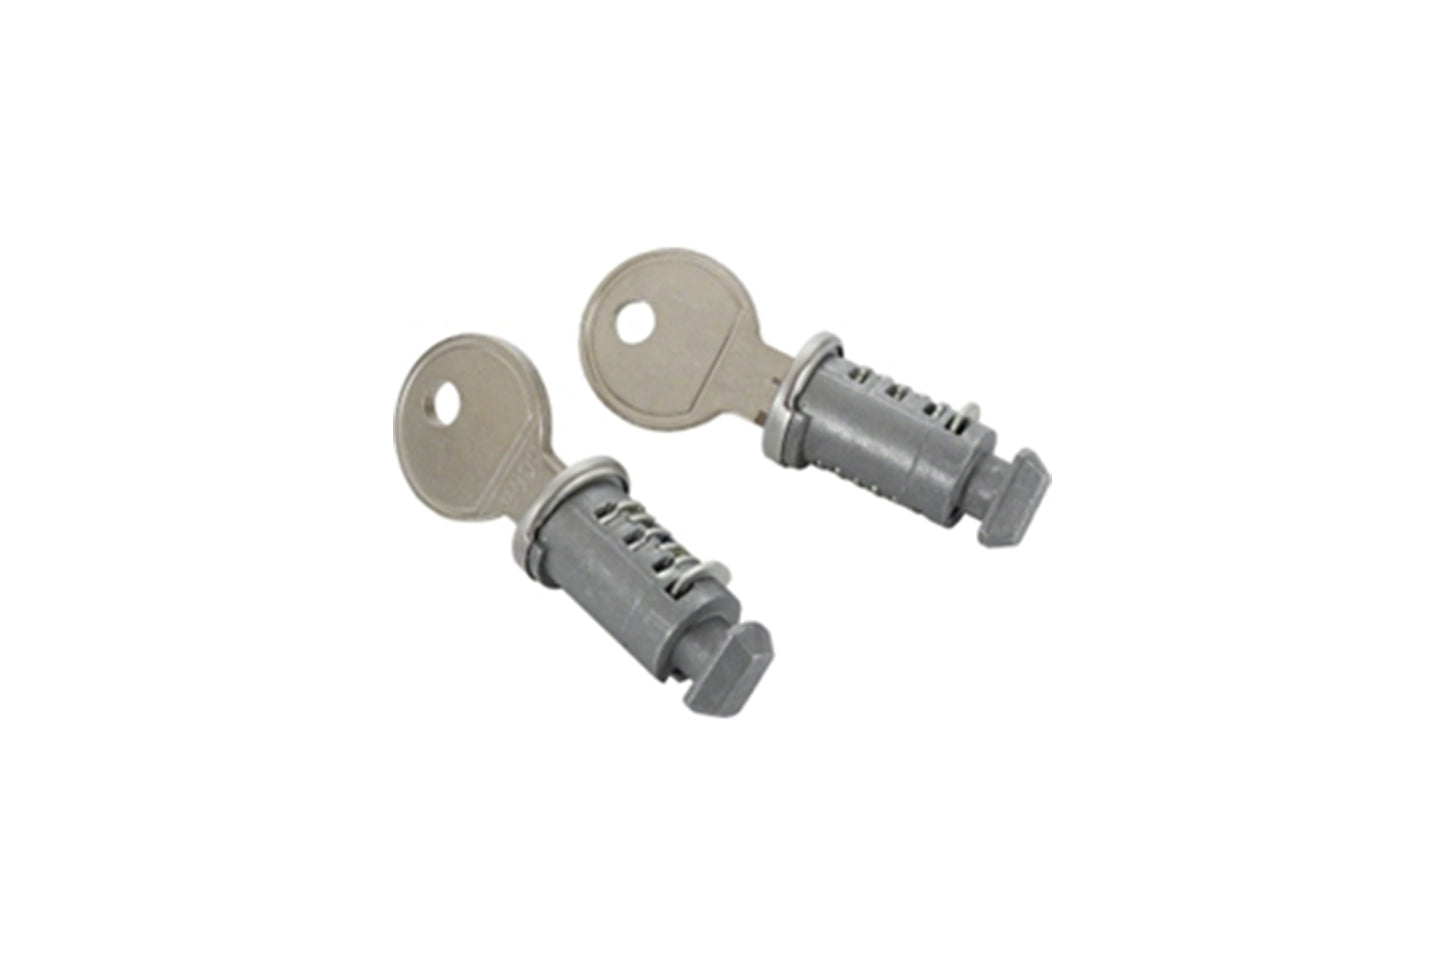 Rocky Mounts Double Lock Cores with 2 Keys